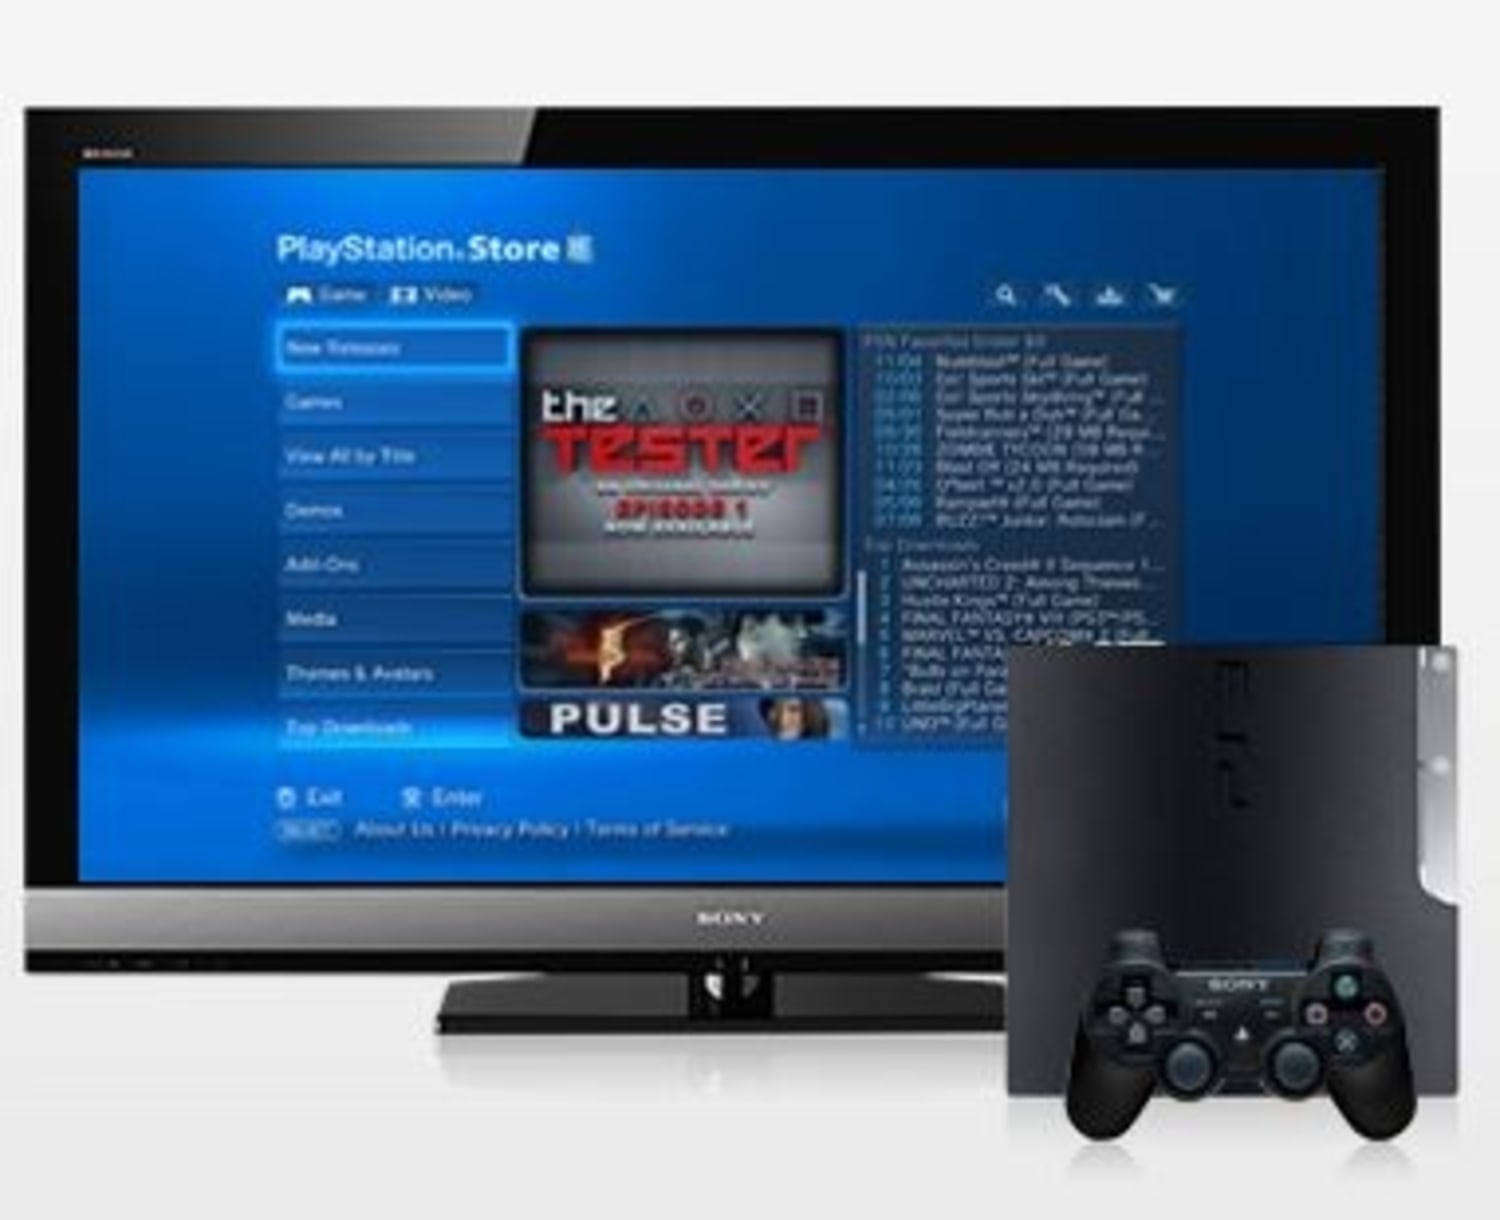 Psn keeps getting hacked and I don't know what I can do : r/playstation